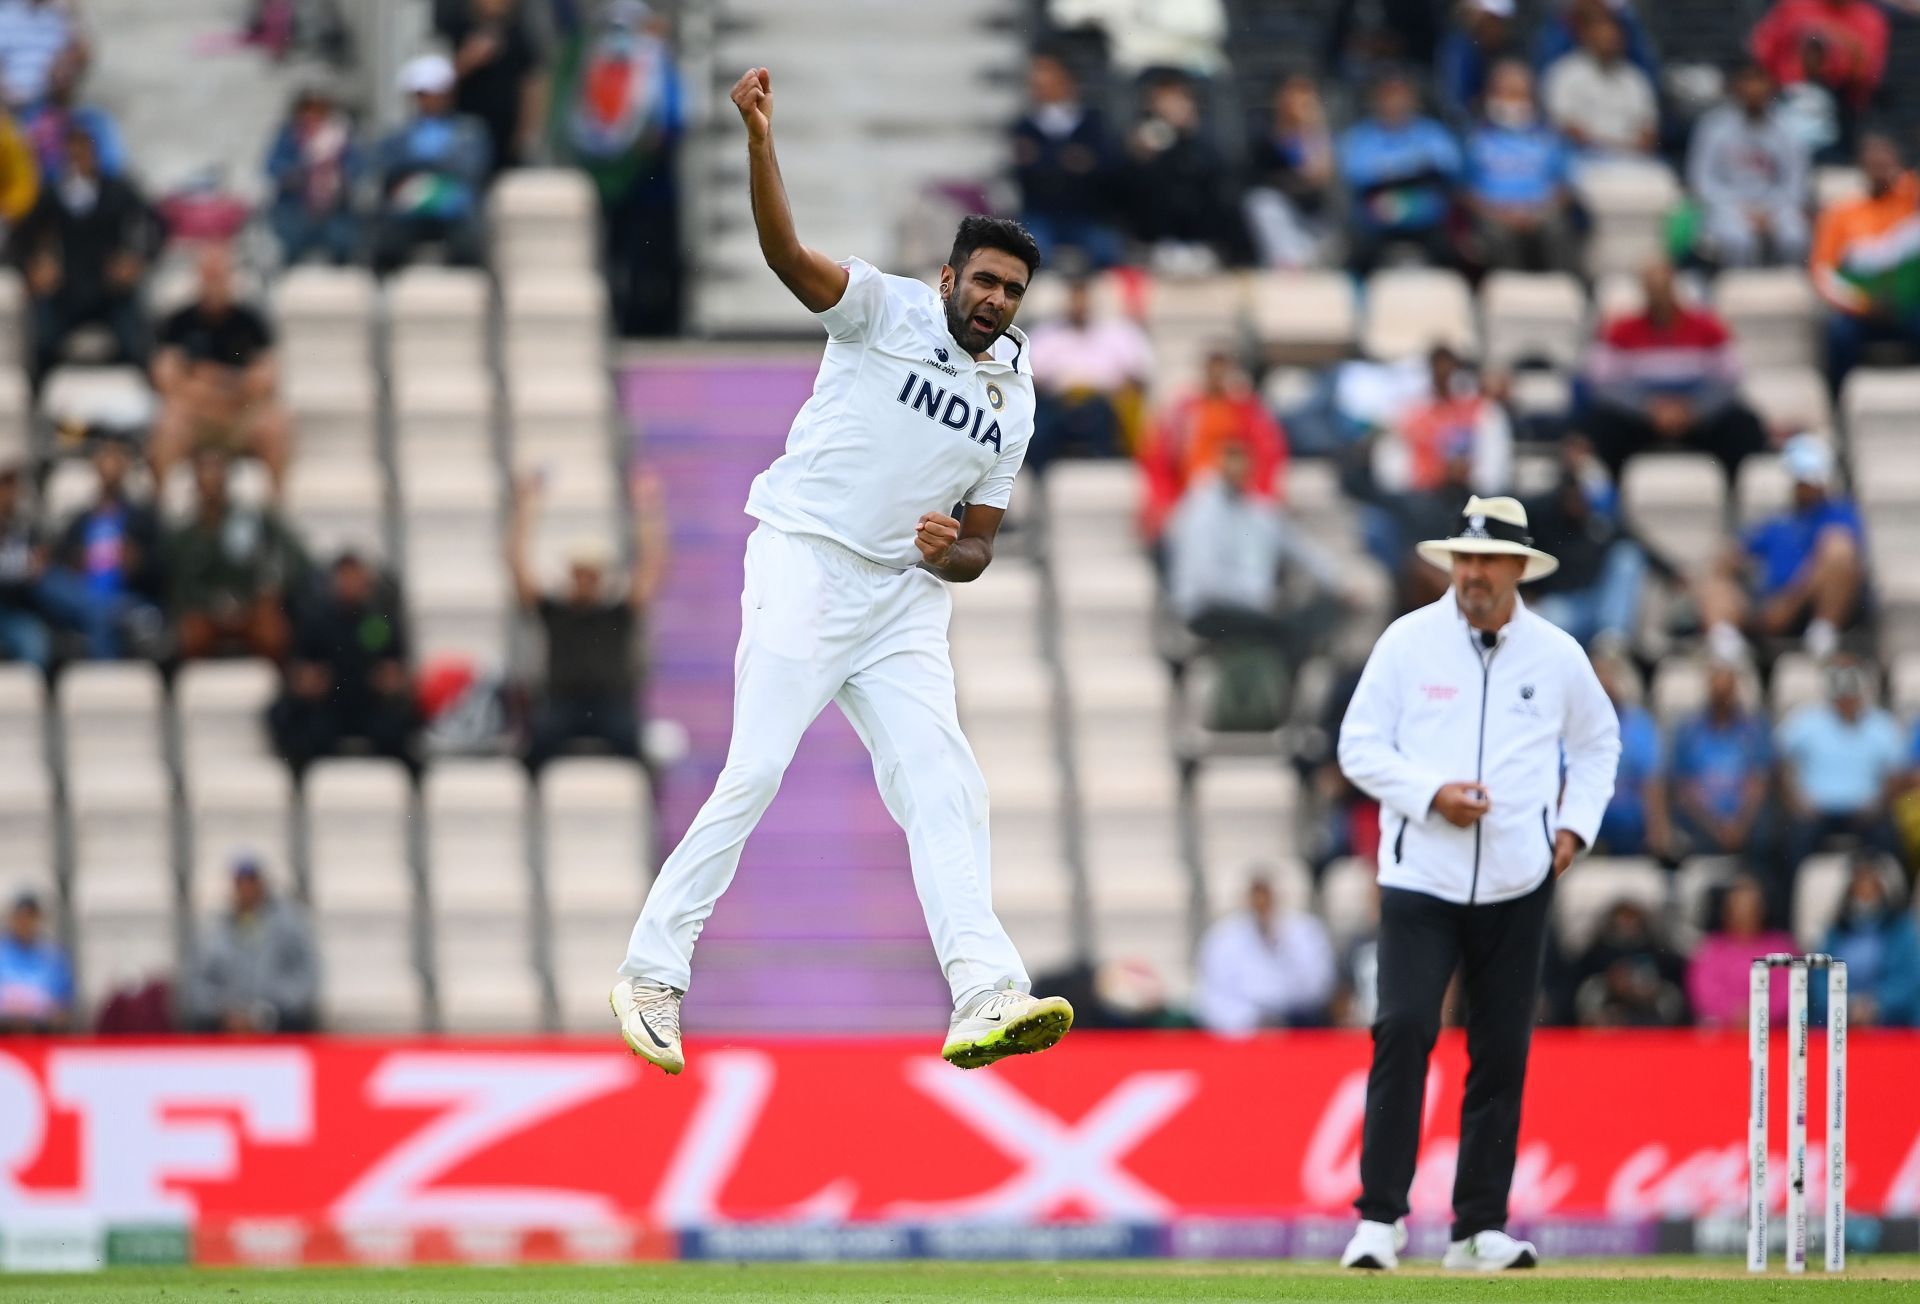 Ravichandran Ashwin will be the player to watch out for at Green Park